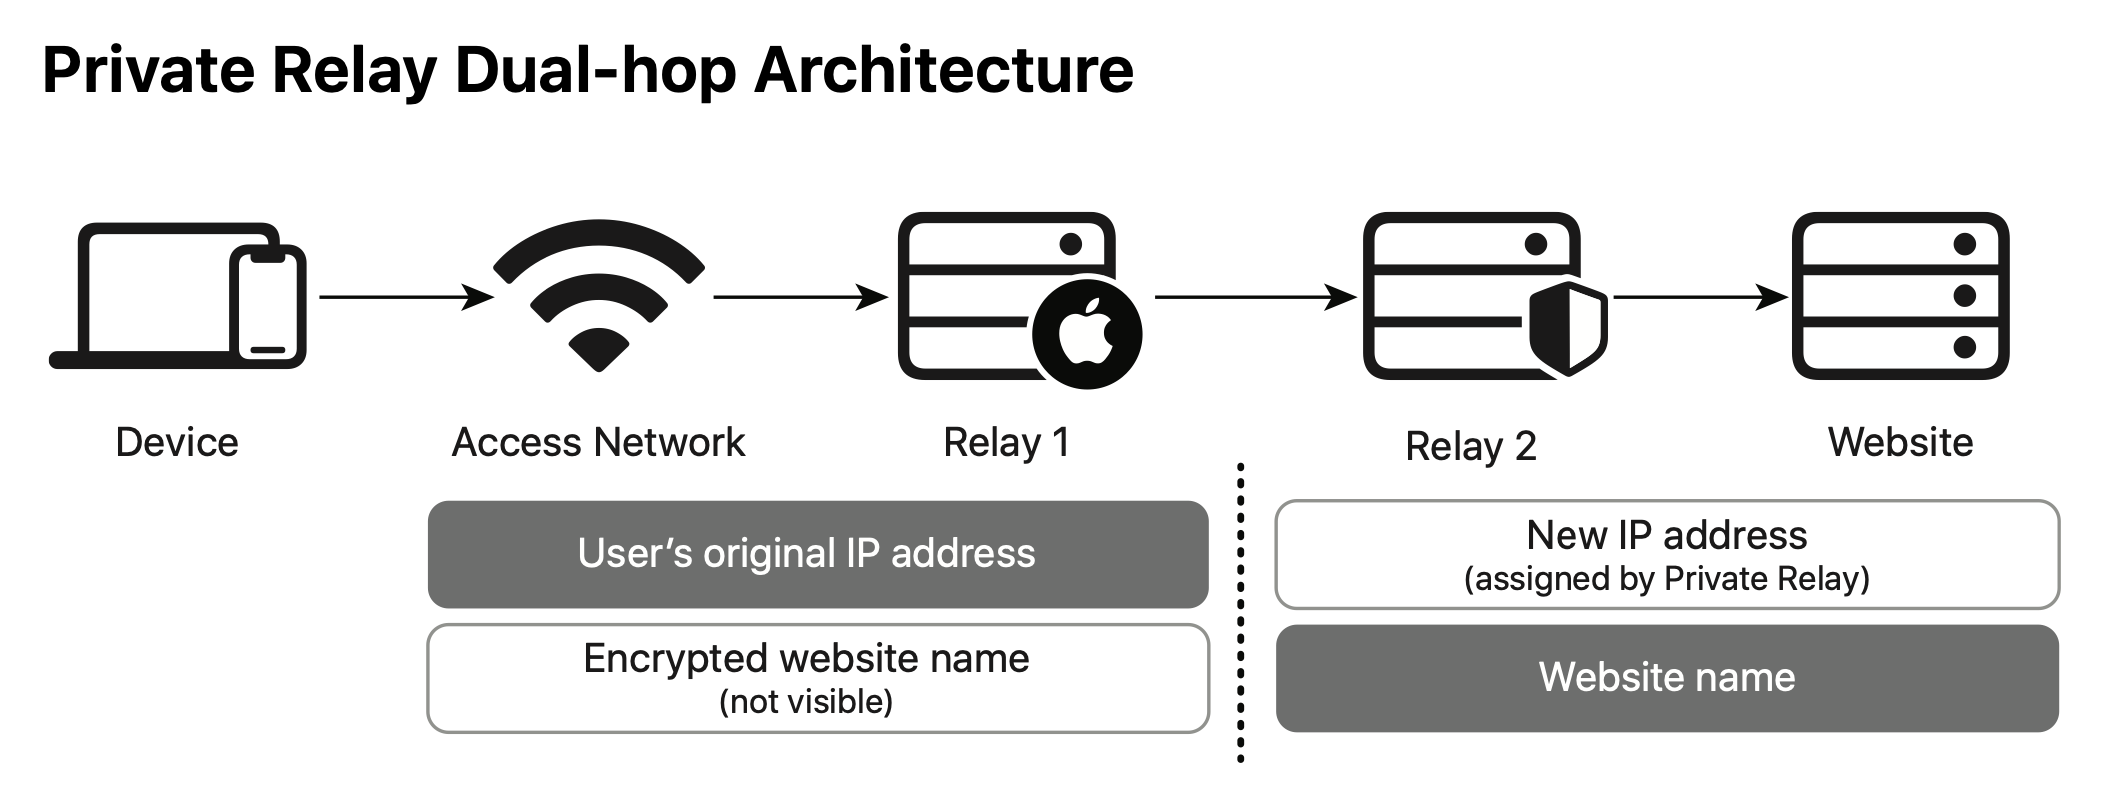 iCloud Private Relay dual-hop architecture diagram.